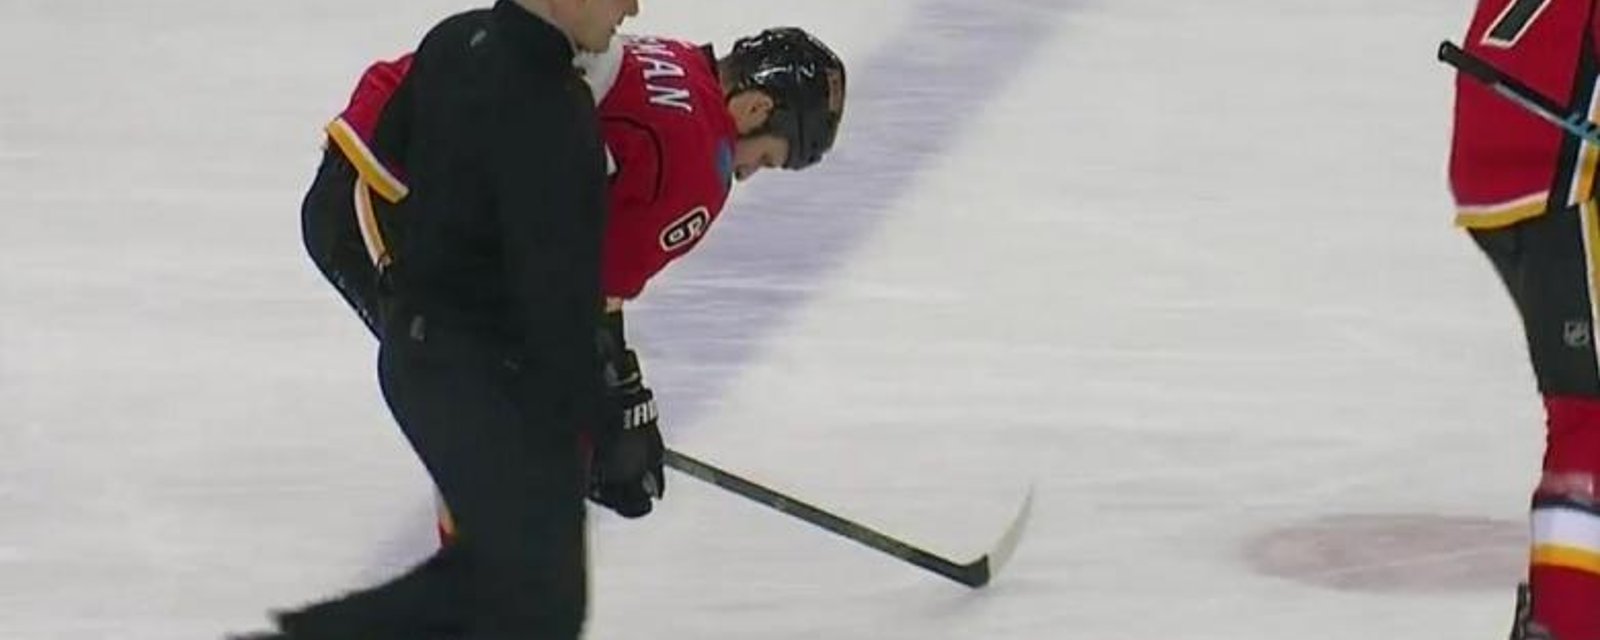 Report: Wideman injured in his third game back from suspension.